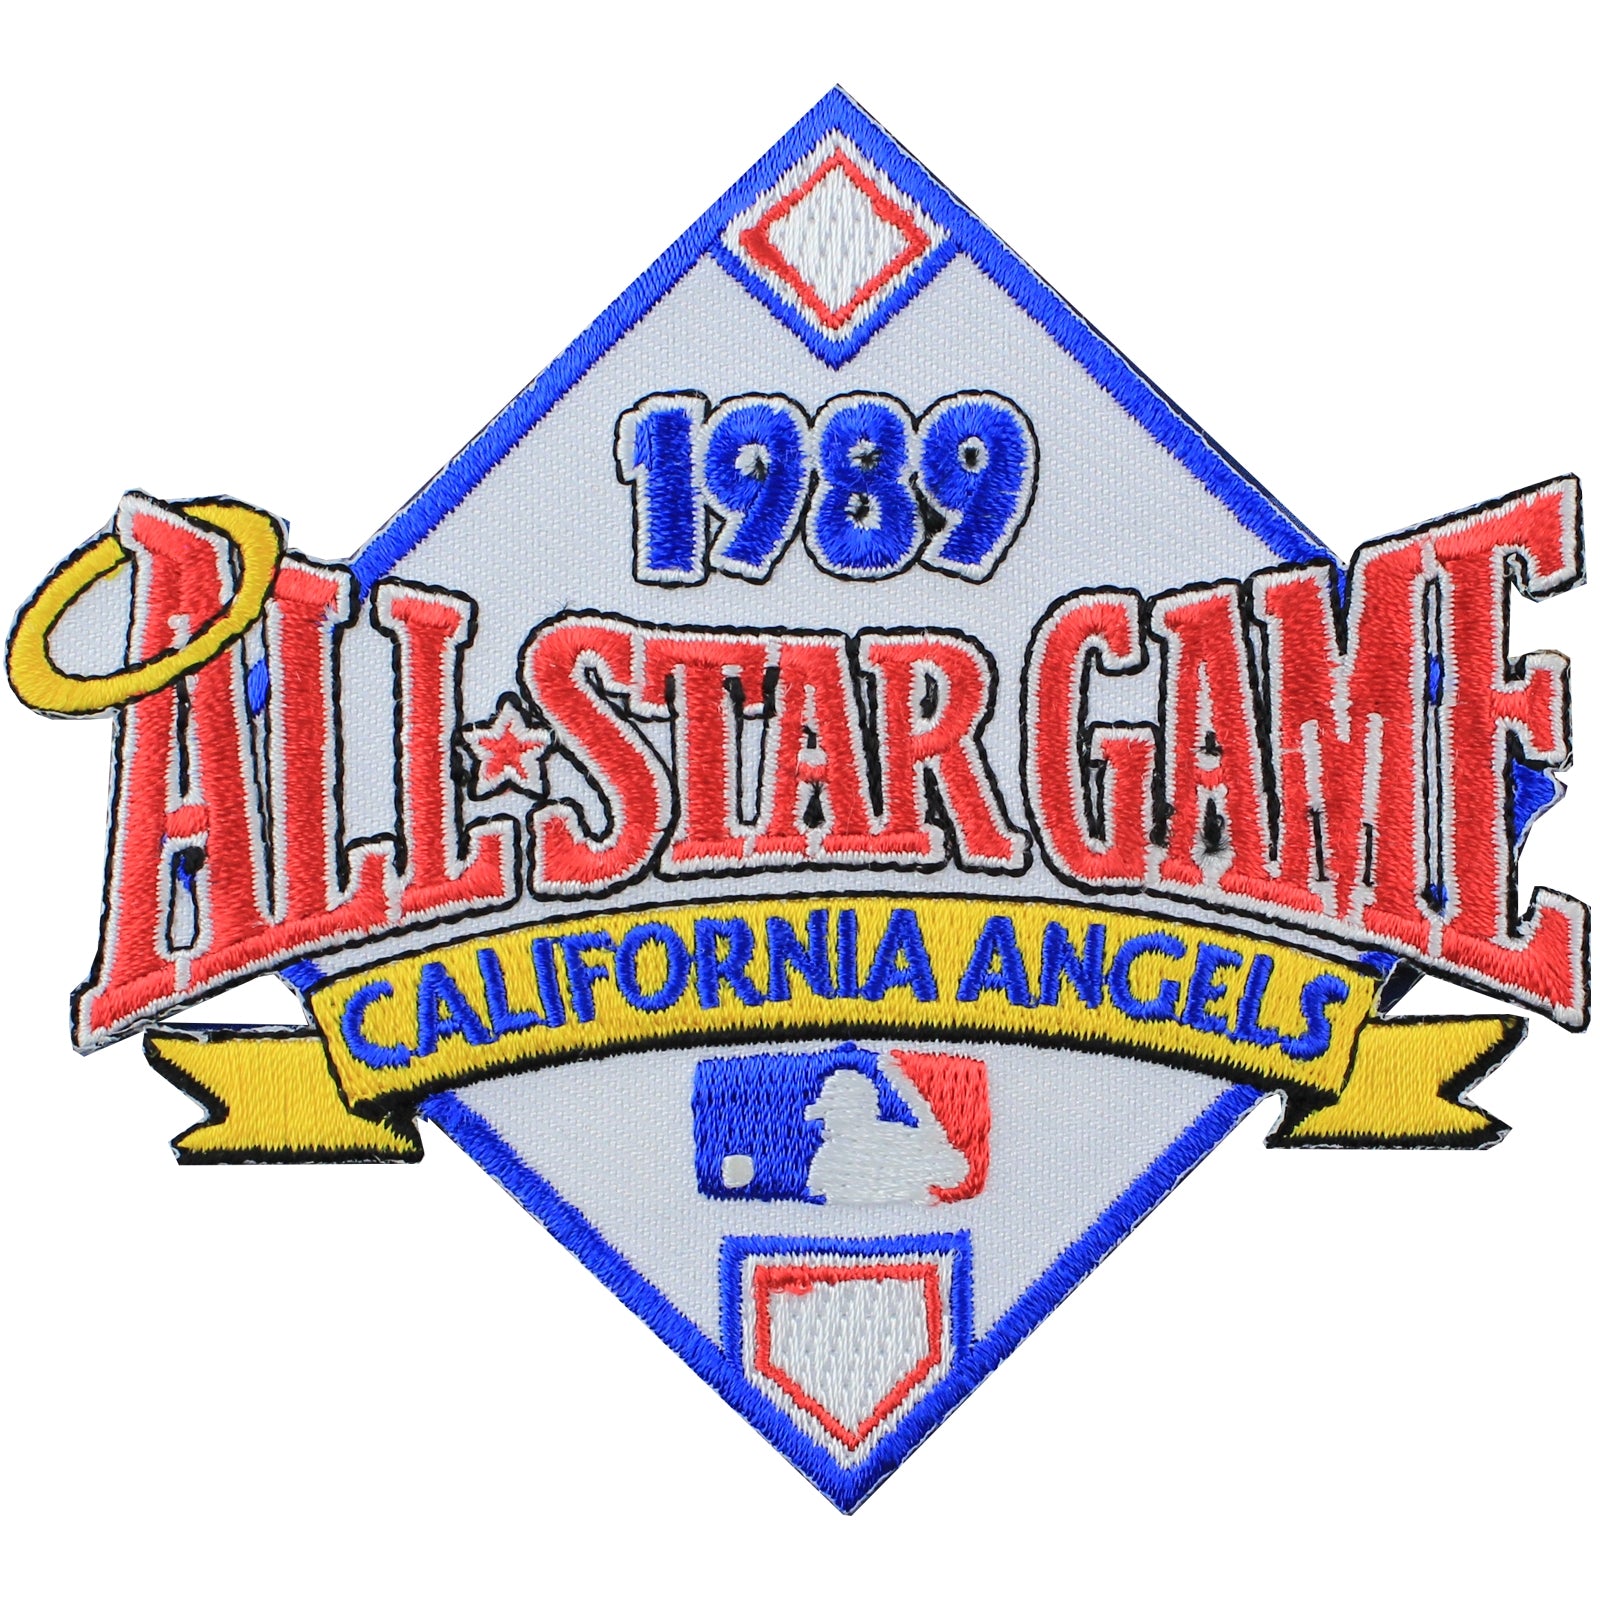 1980 MLB All Star Game Los Angeles Dodgers Stadium Jersey Patch